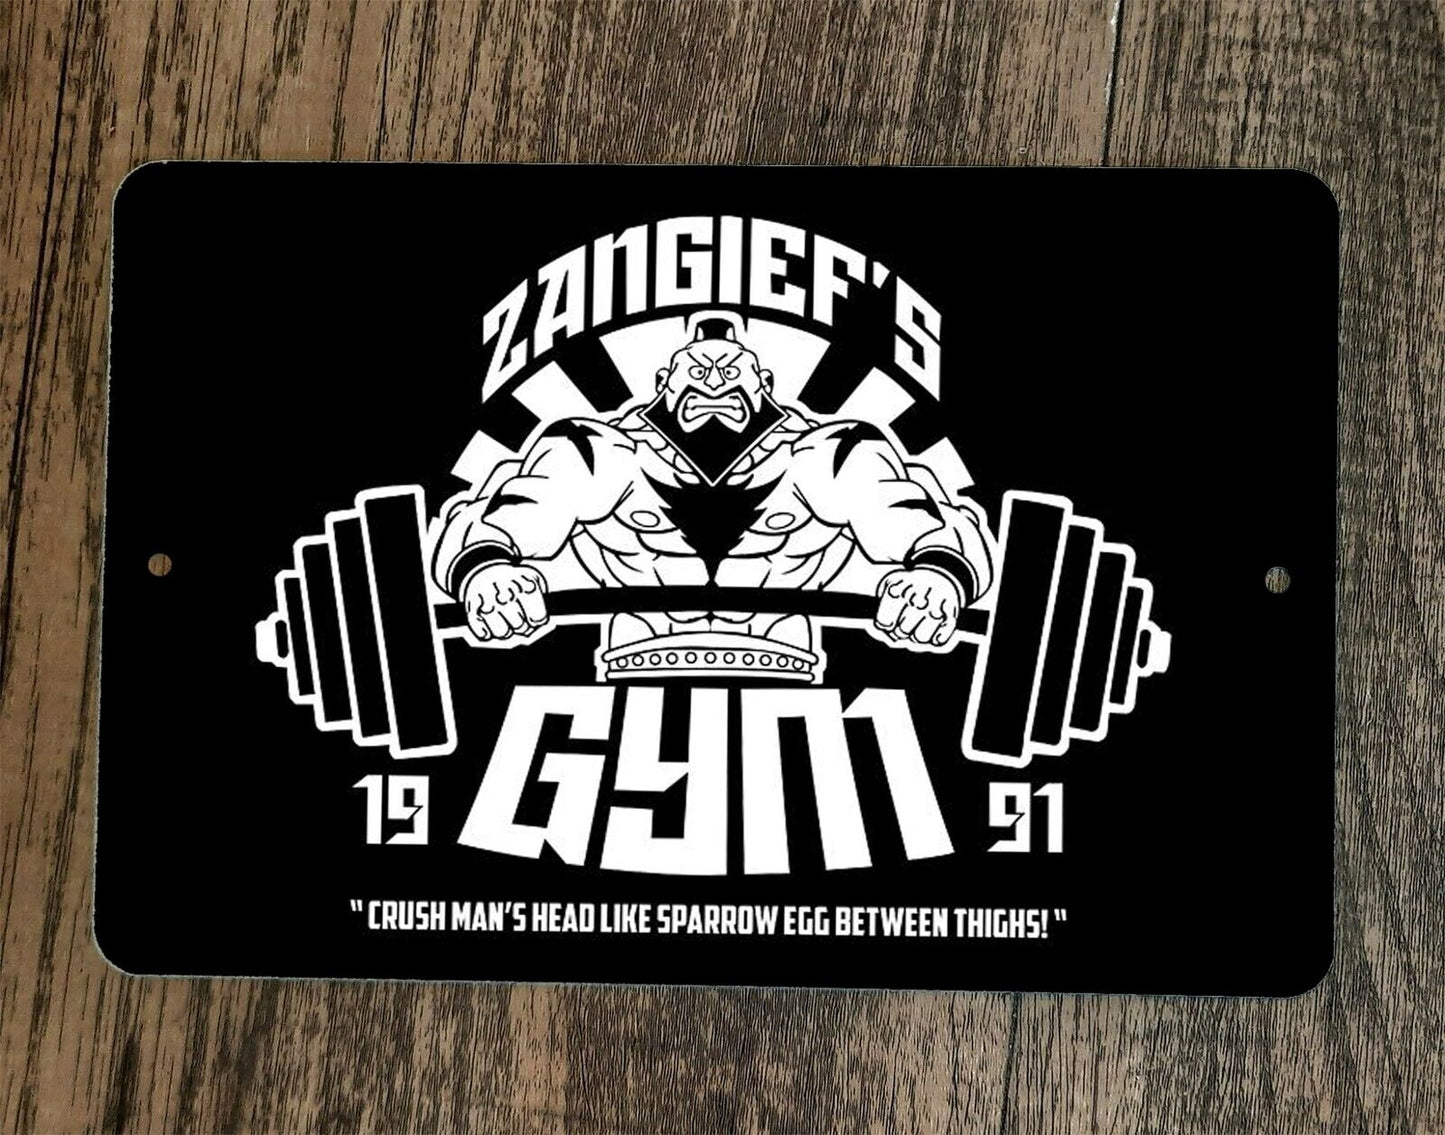 Zangiefs Gym Street Fighter 8x12 Metal Wall Sign Poster Video Game